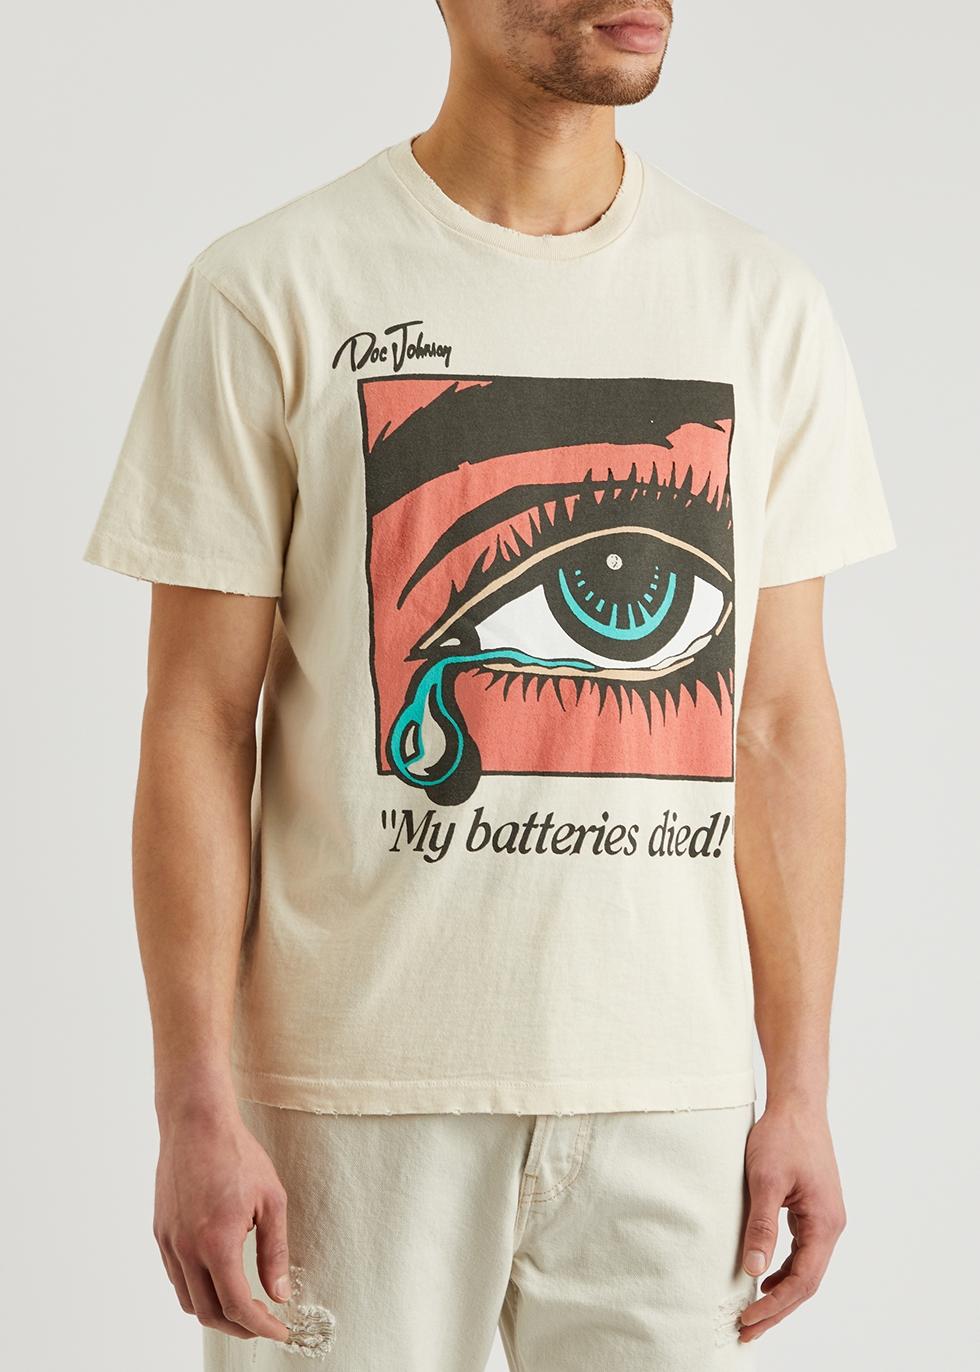 GALLERY DEPT. Dead Batteries Printed Cotton T-shirt in White for